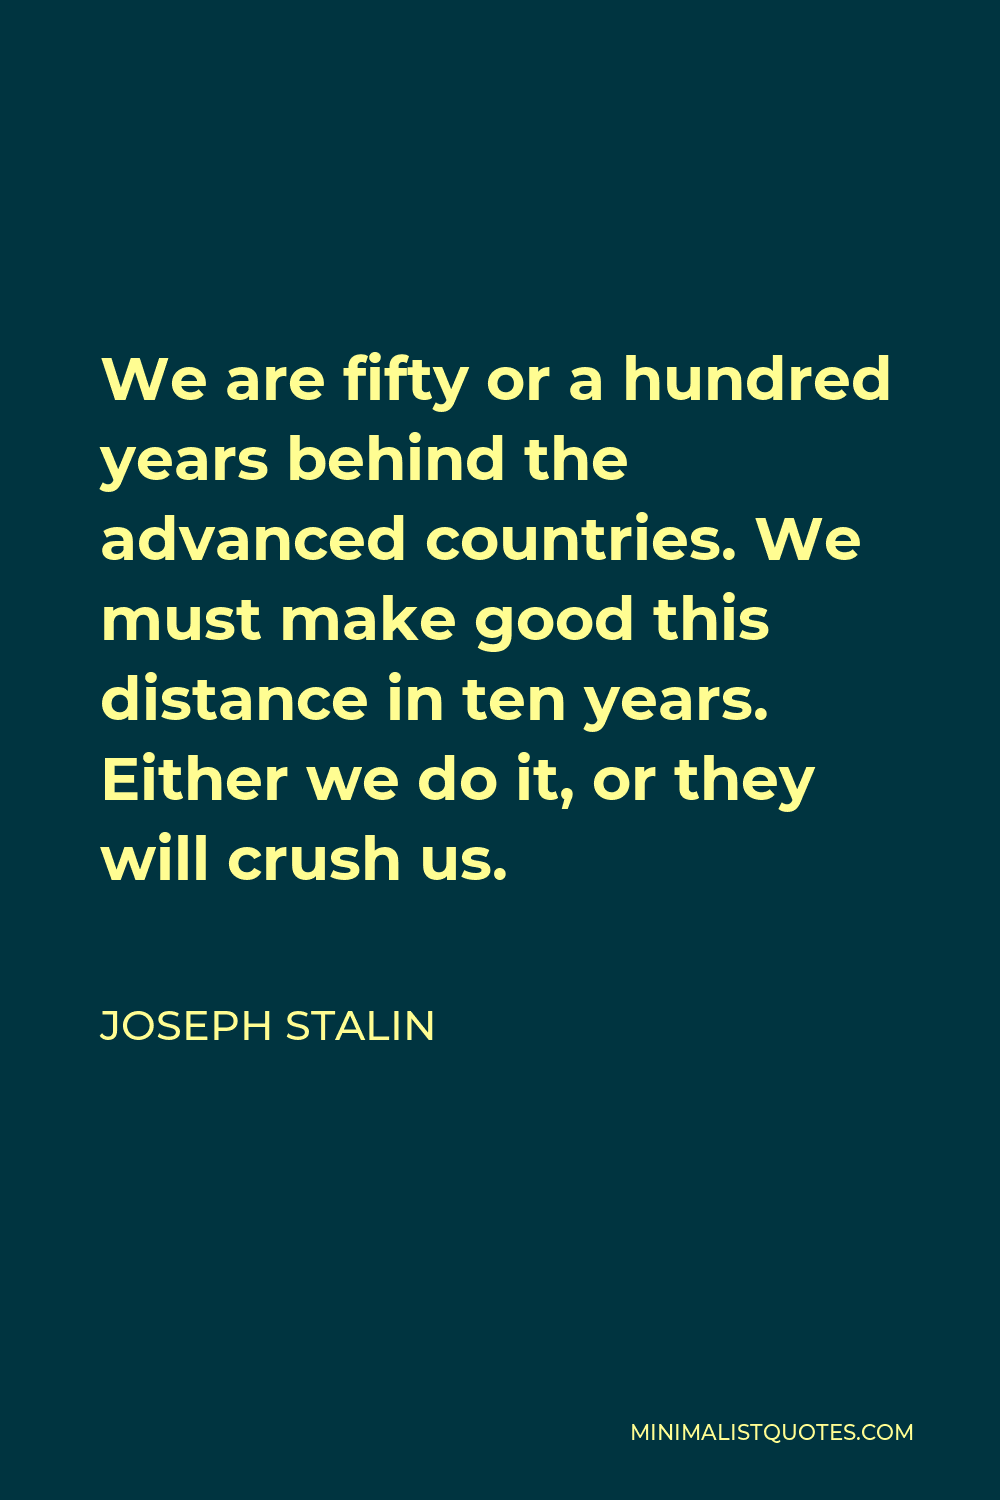 Joseph Stalin Quote - We are fifty or a hundred years behind the advanced countries. We must make good this distance in ten years. Either we do it, or they will crush us.